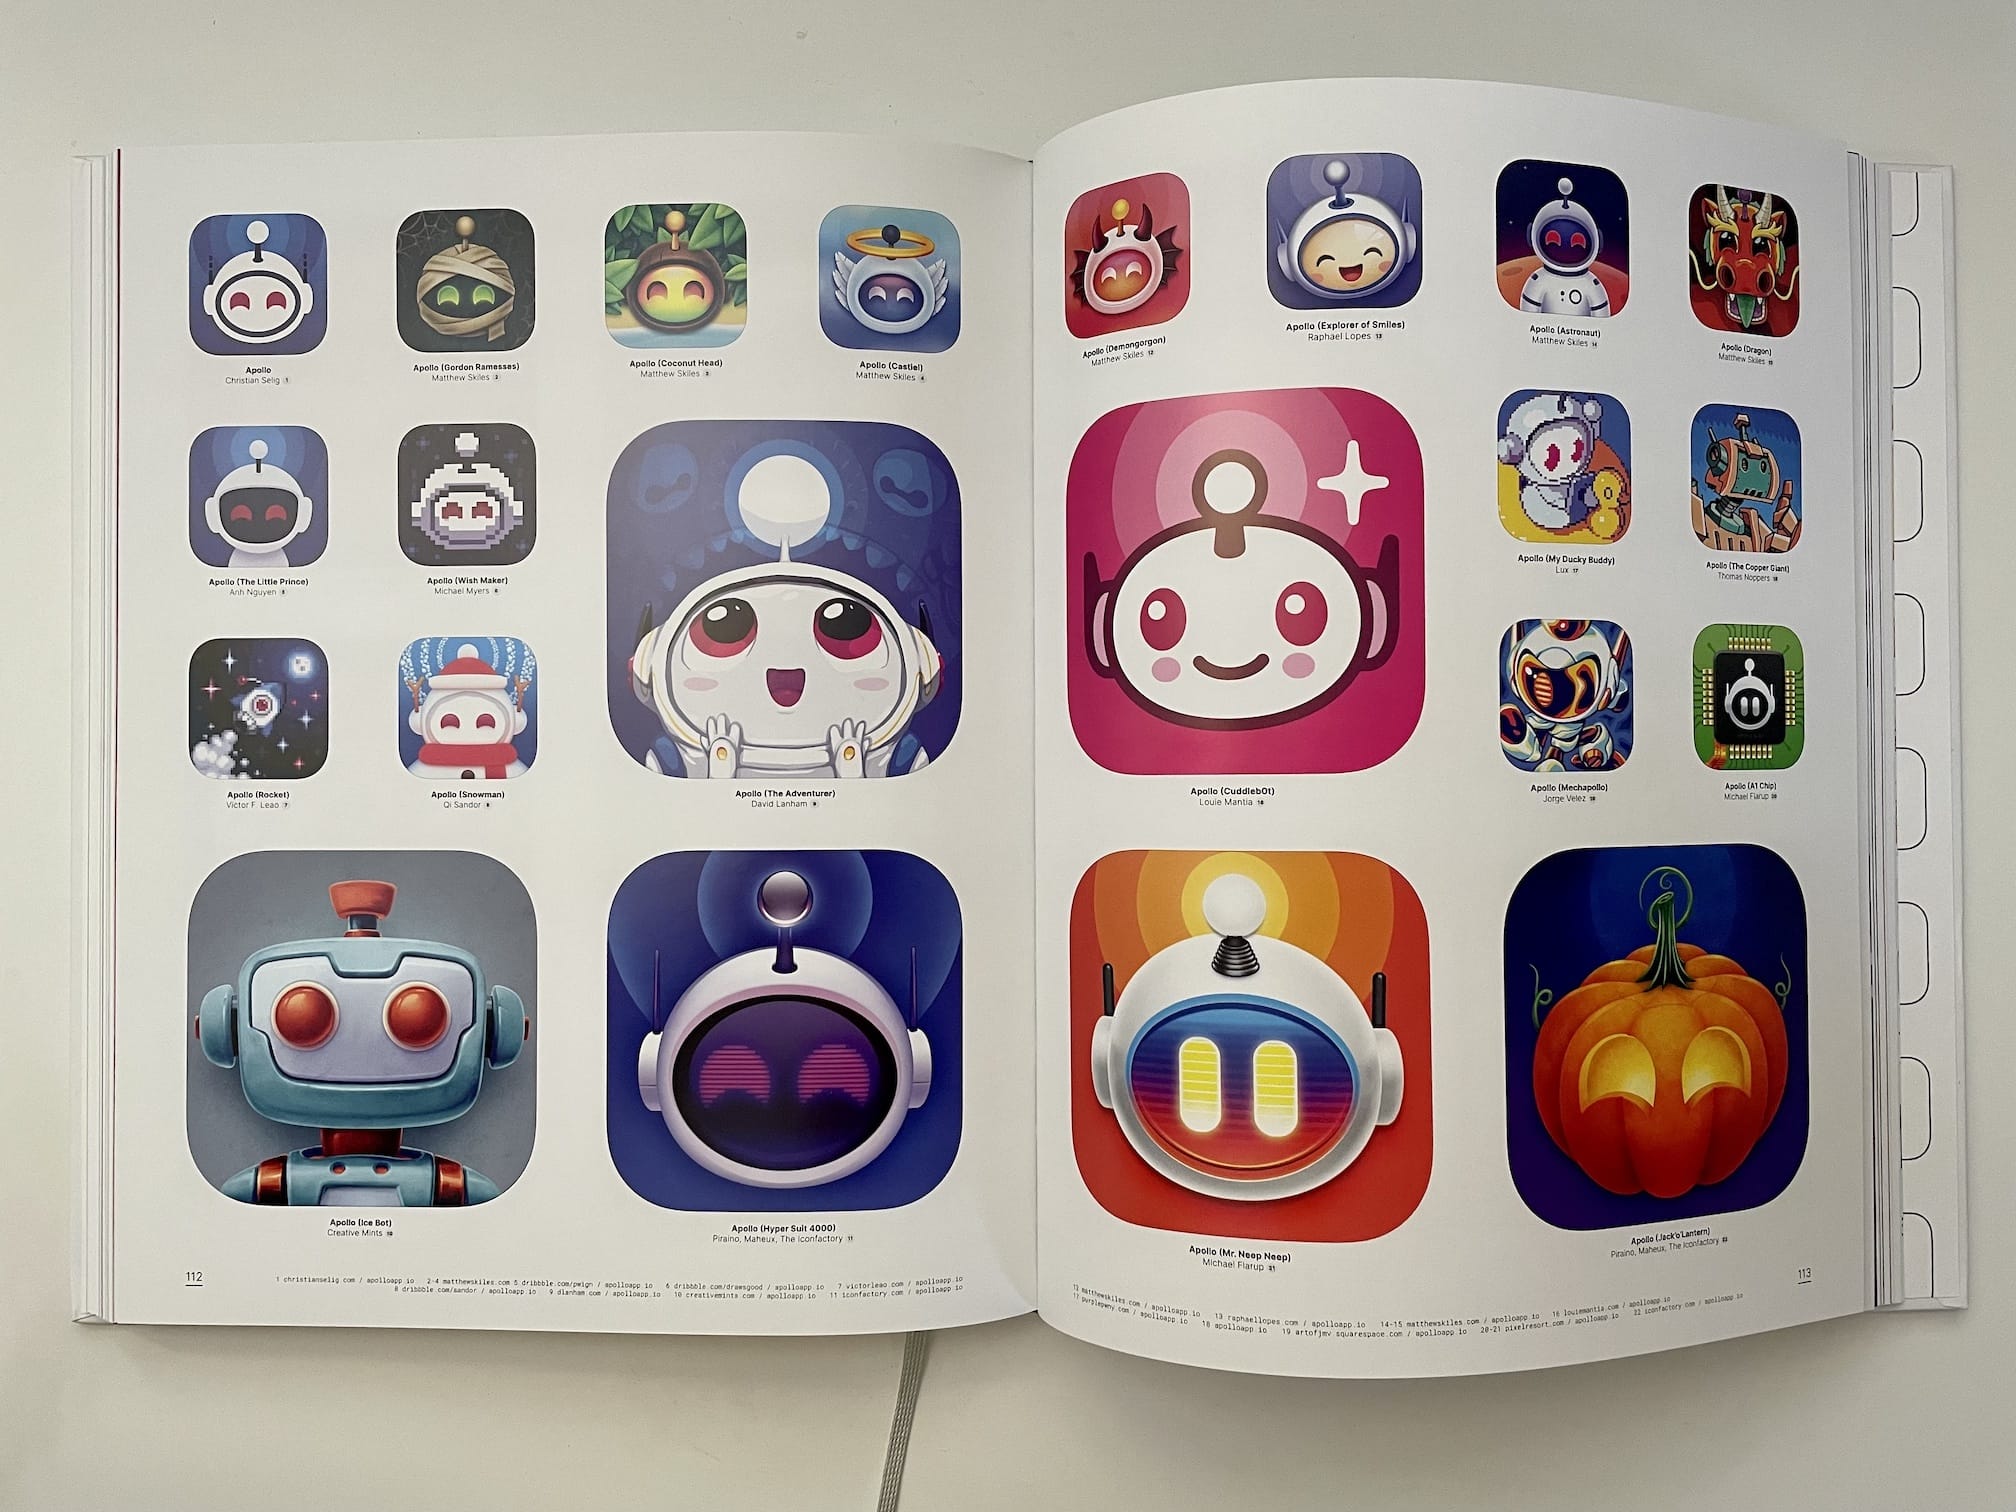 Photograph of “The App Icon Book” open to pages 112 and 113 showing variations of the “Apollo” app icon.